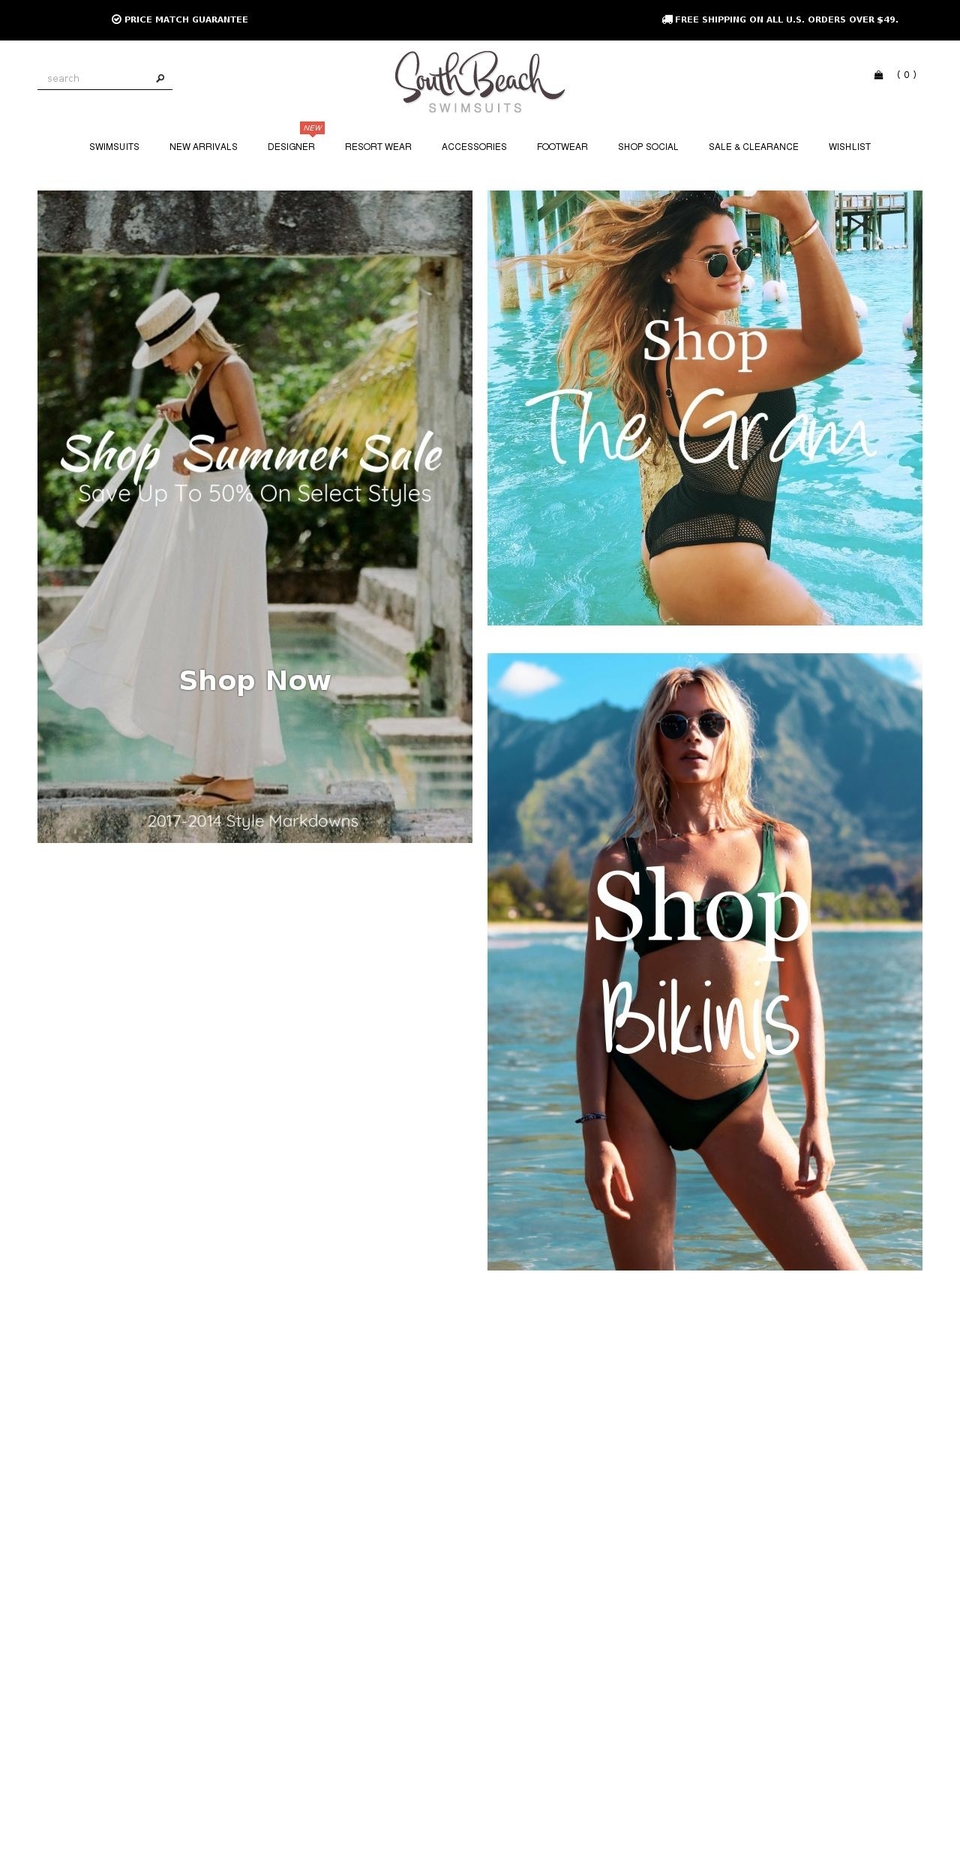 Made With ❤ By Minion Made - Updated Checkout Shopify theme site example lspaceswimsuits.com